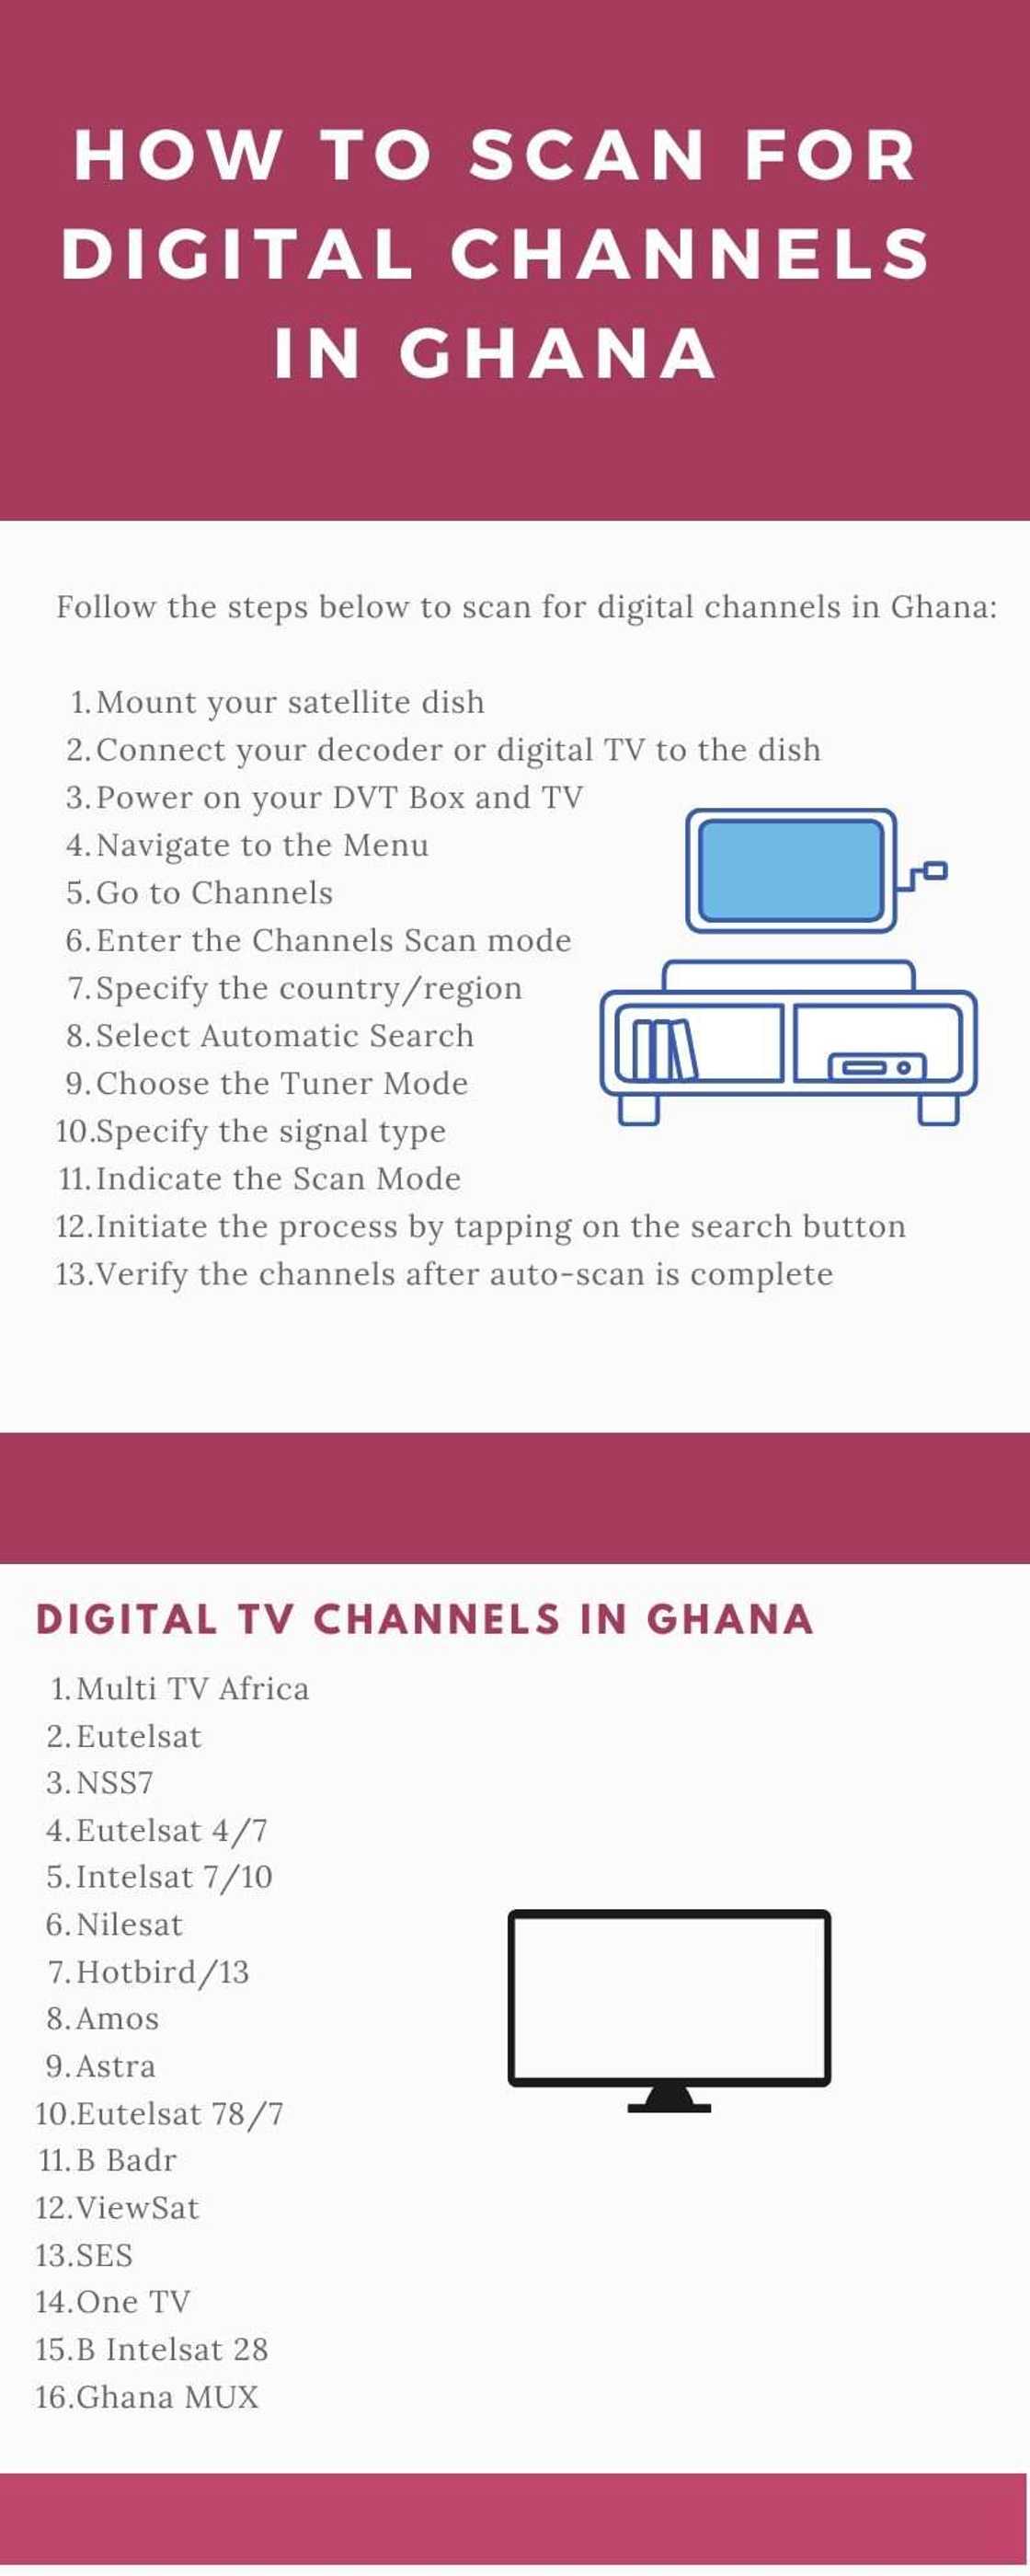 How to scan for digital channels in Ghana